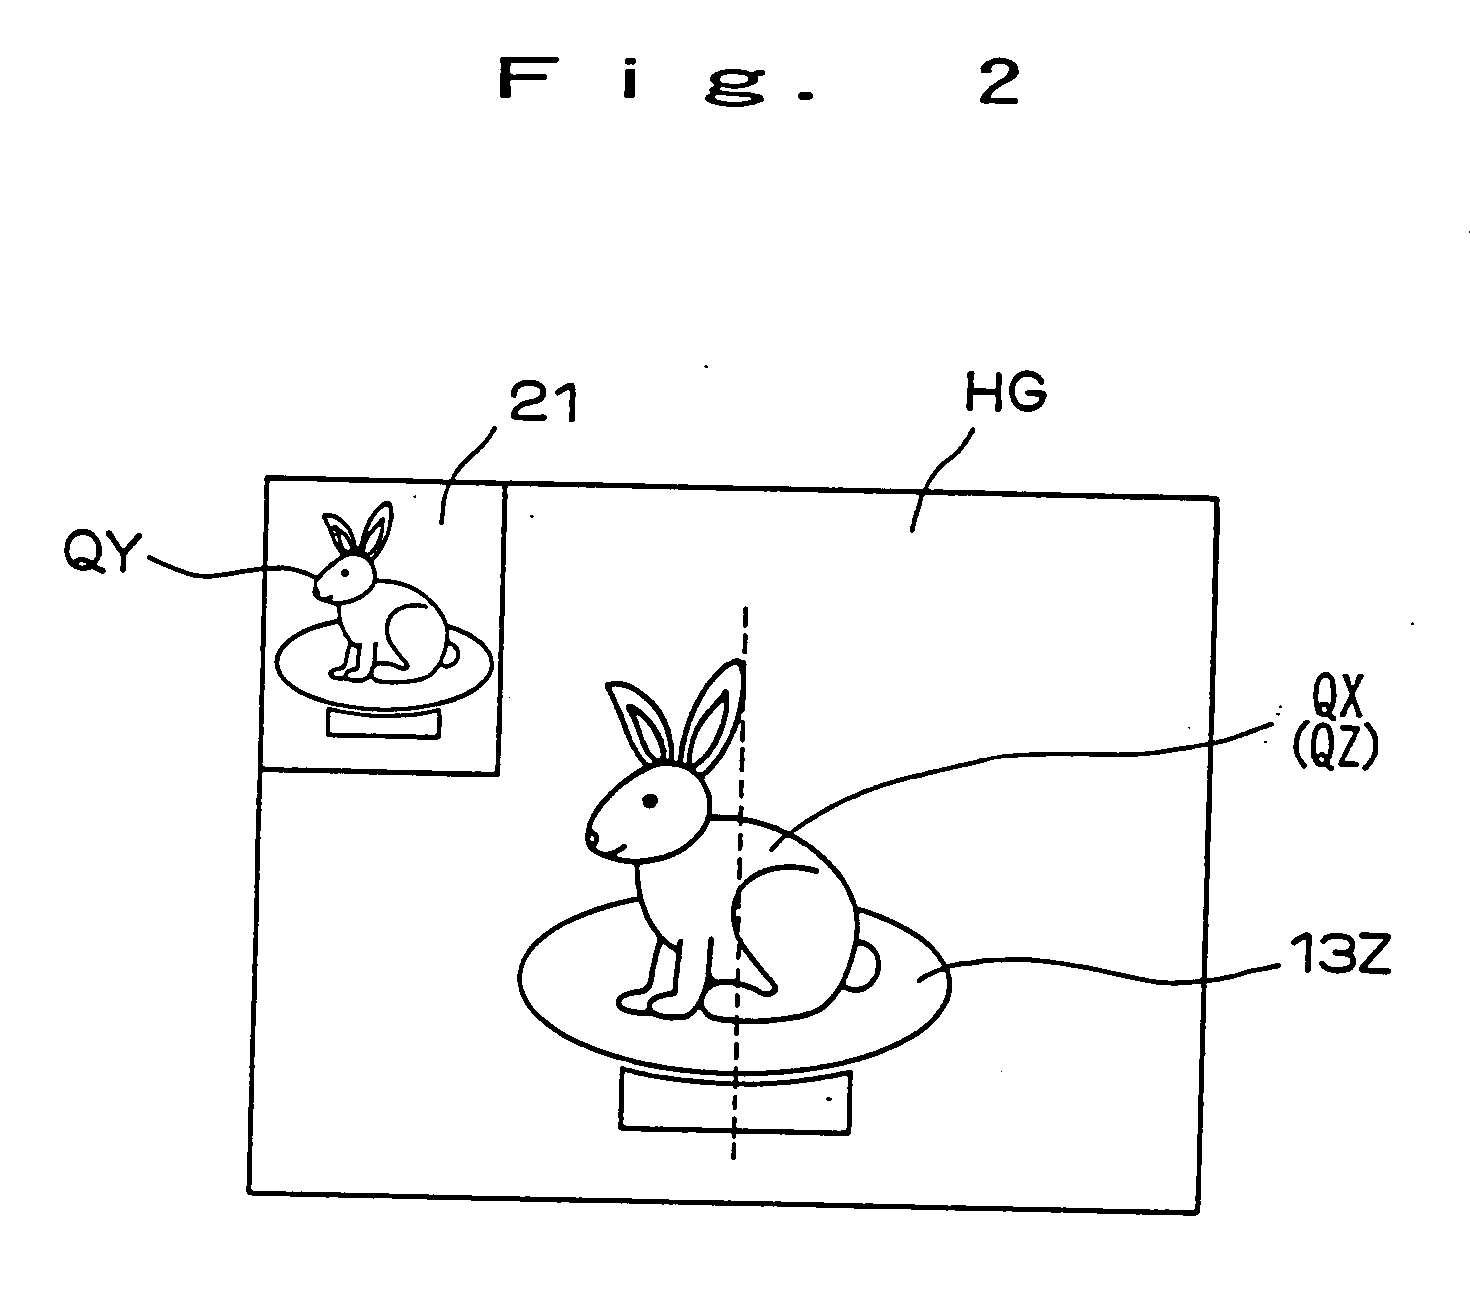 Apparatus for obtaining data on the three-dimensional shape